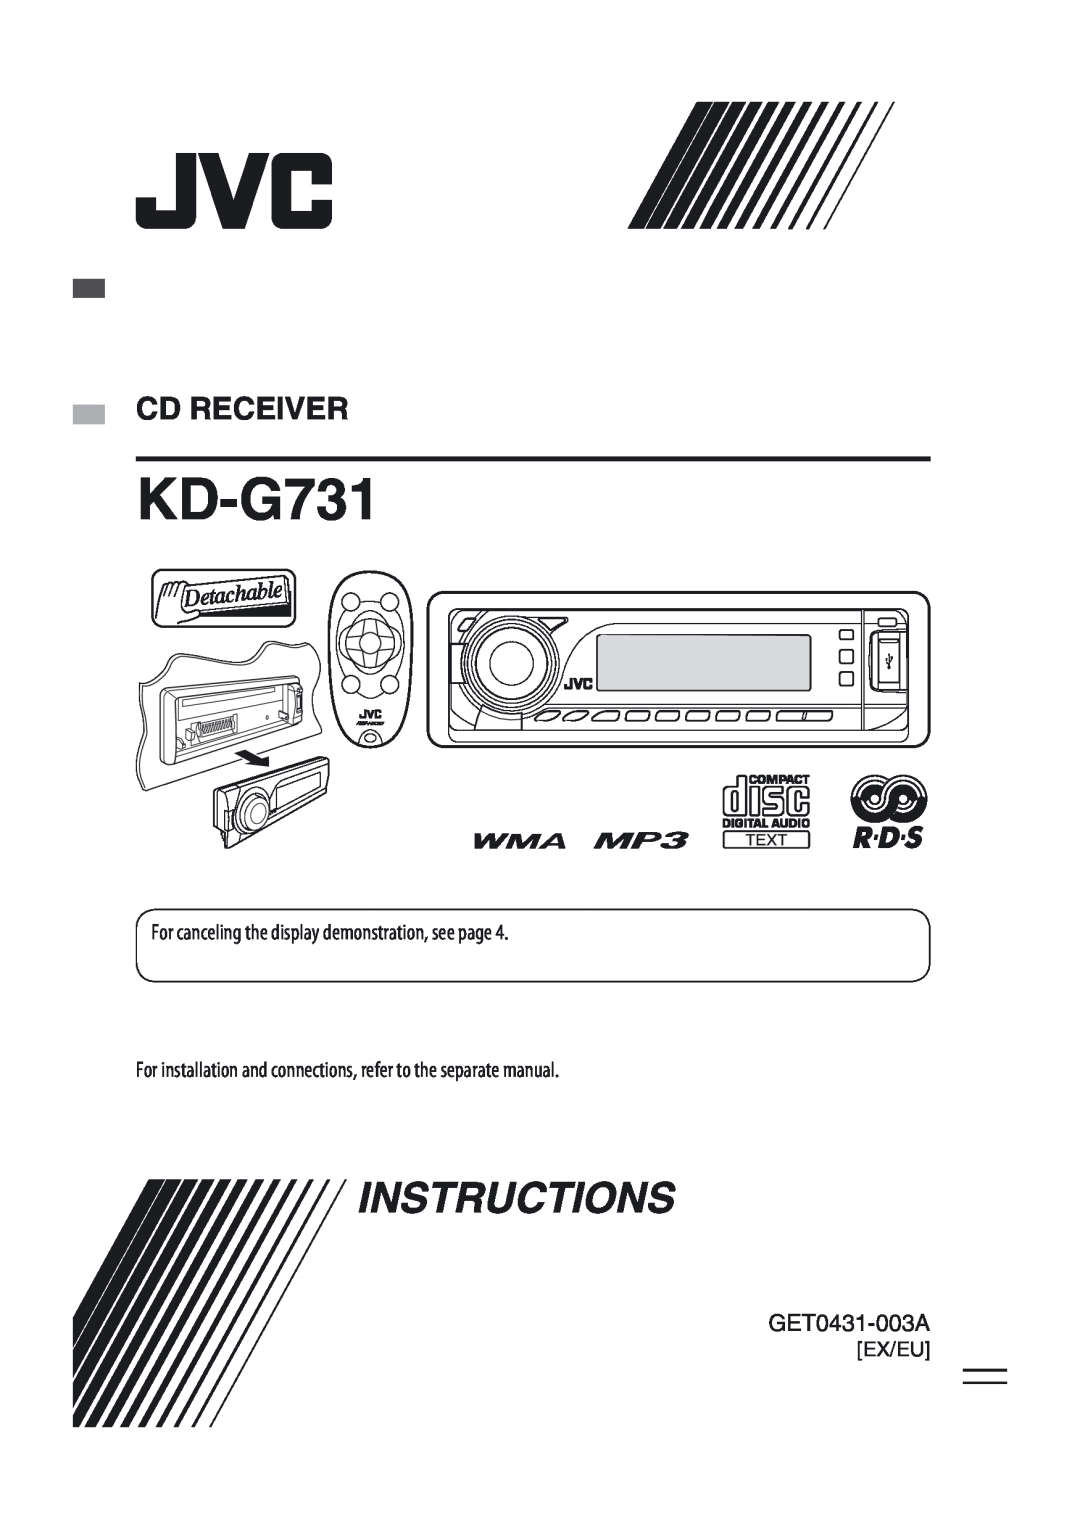 JVC KD-G731 manual GET0431-003A, Instructions, Cd Receiver, For canceling the display demonstration, see page, Ex/Eu 